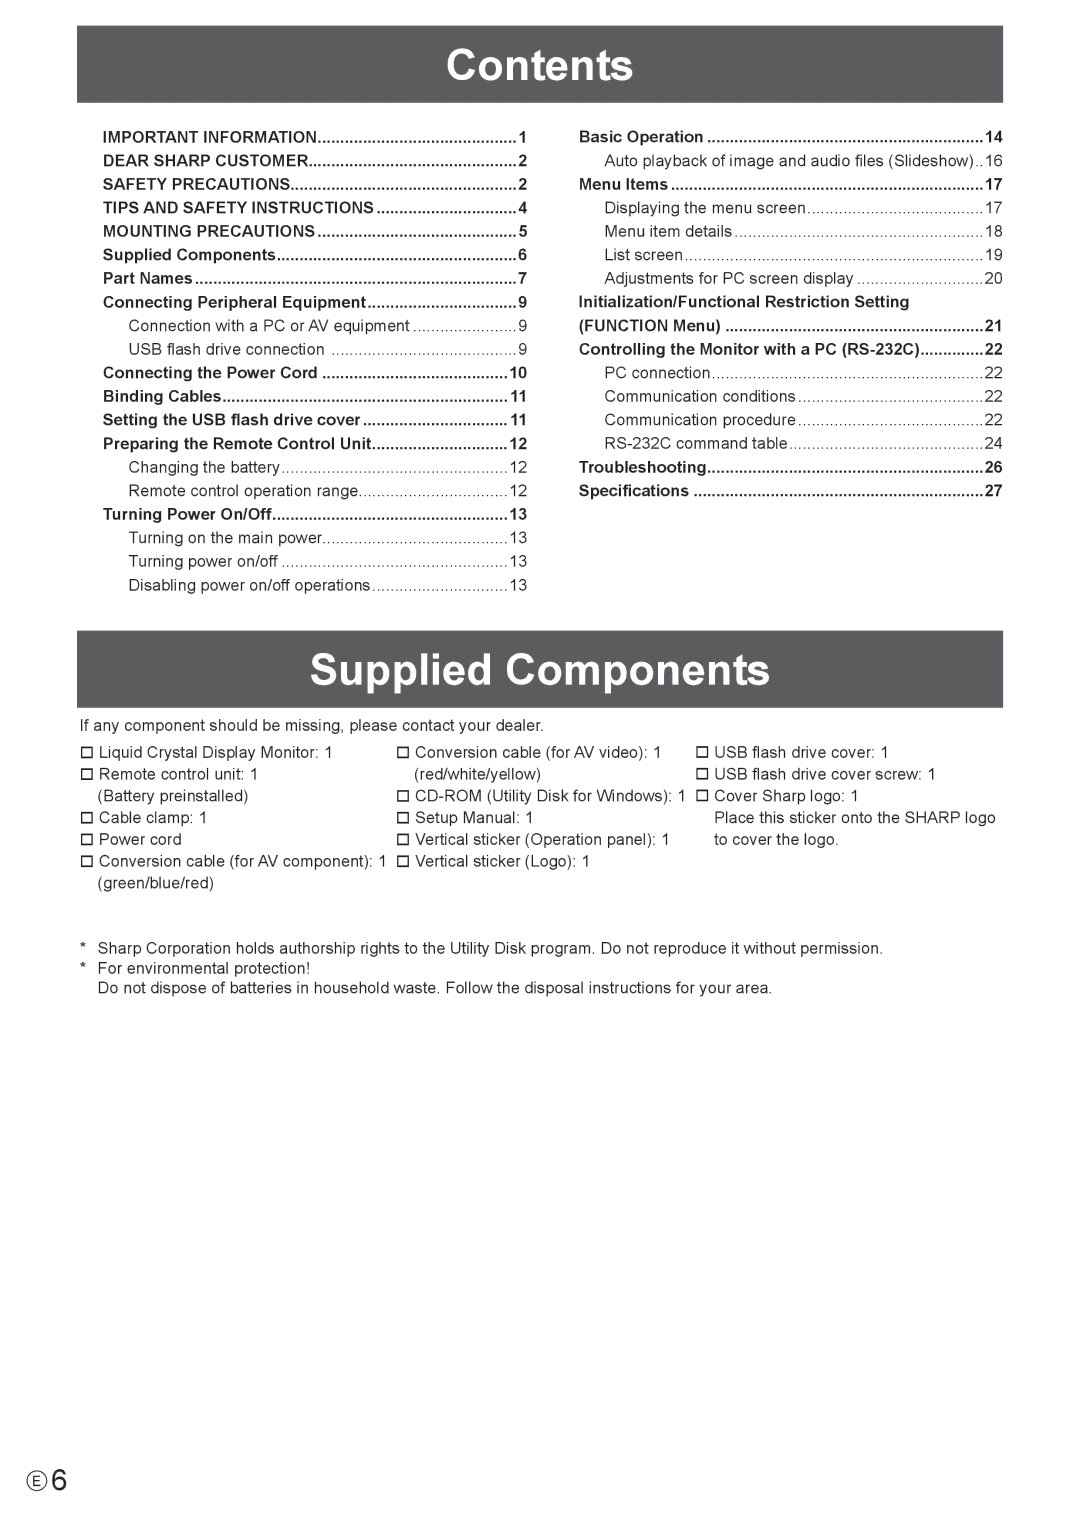 Sharp PN-T321 operation manual Contents, Supplied Components 